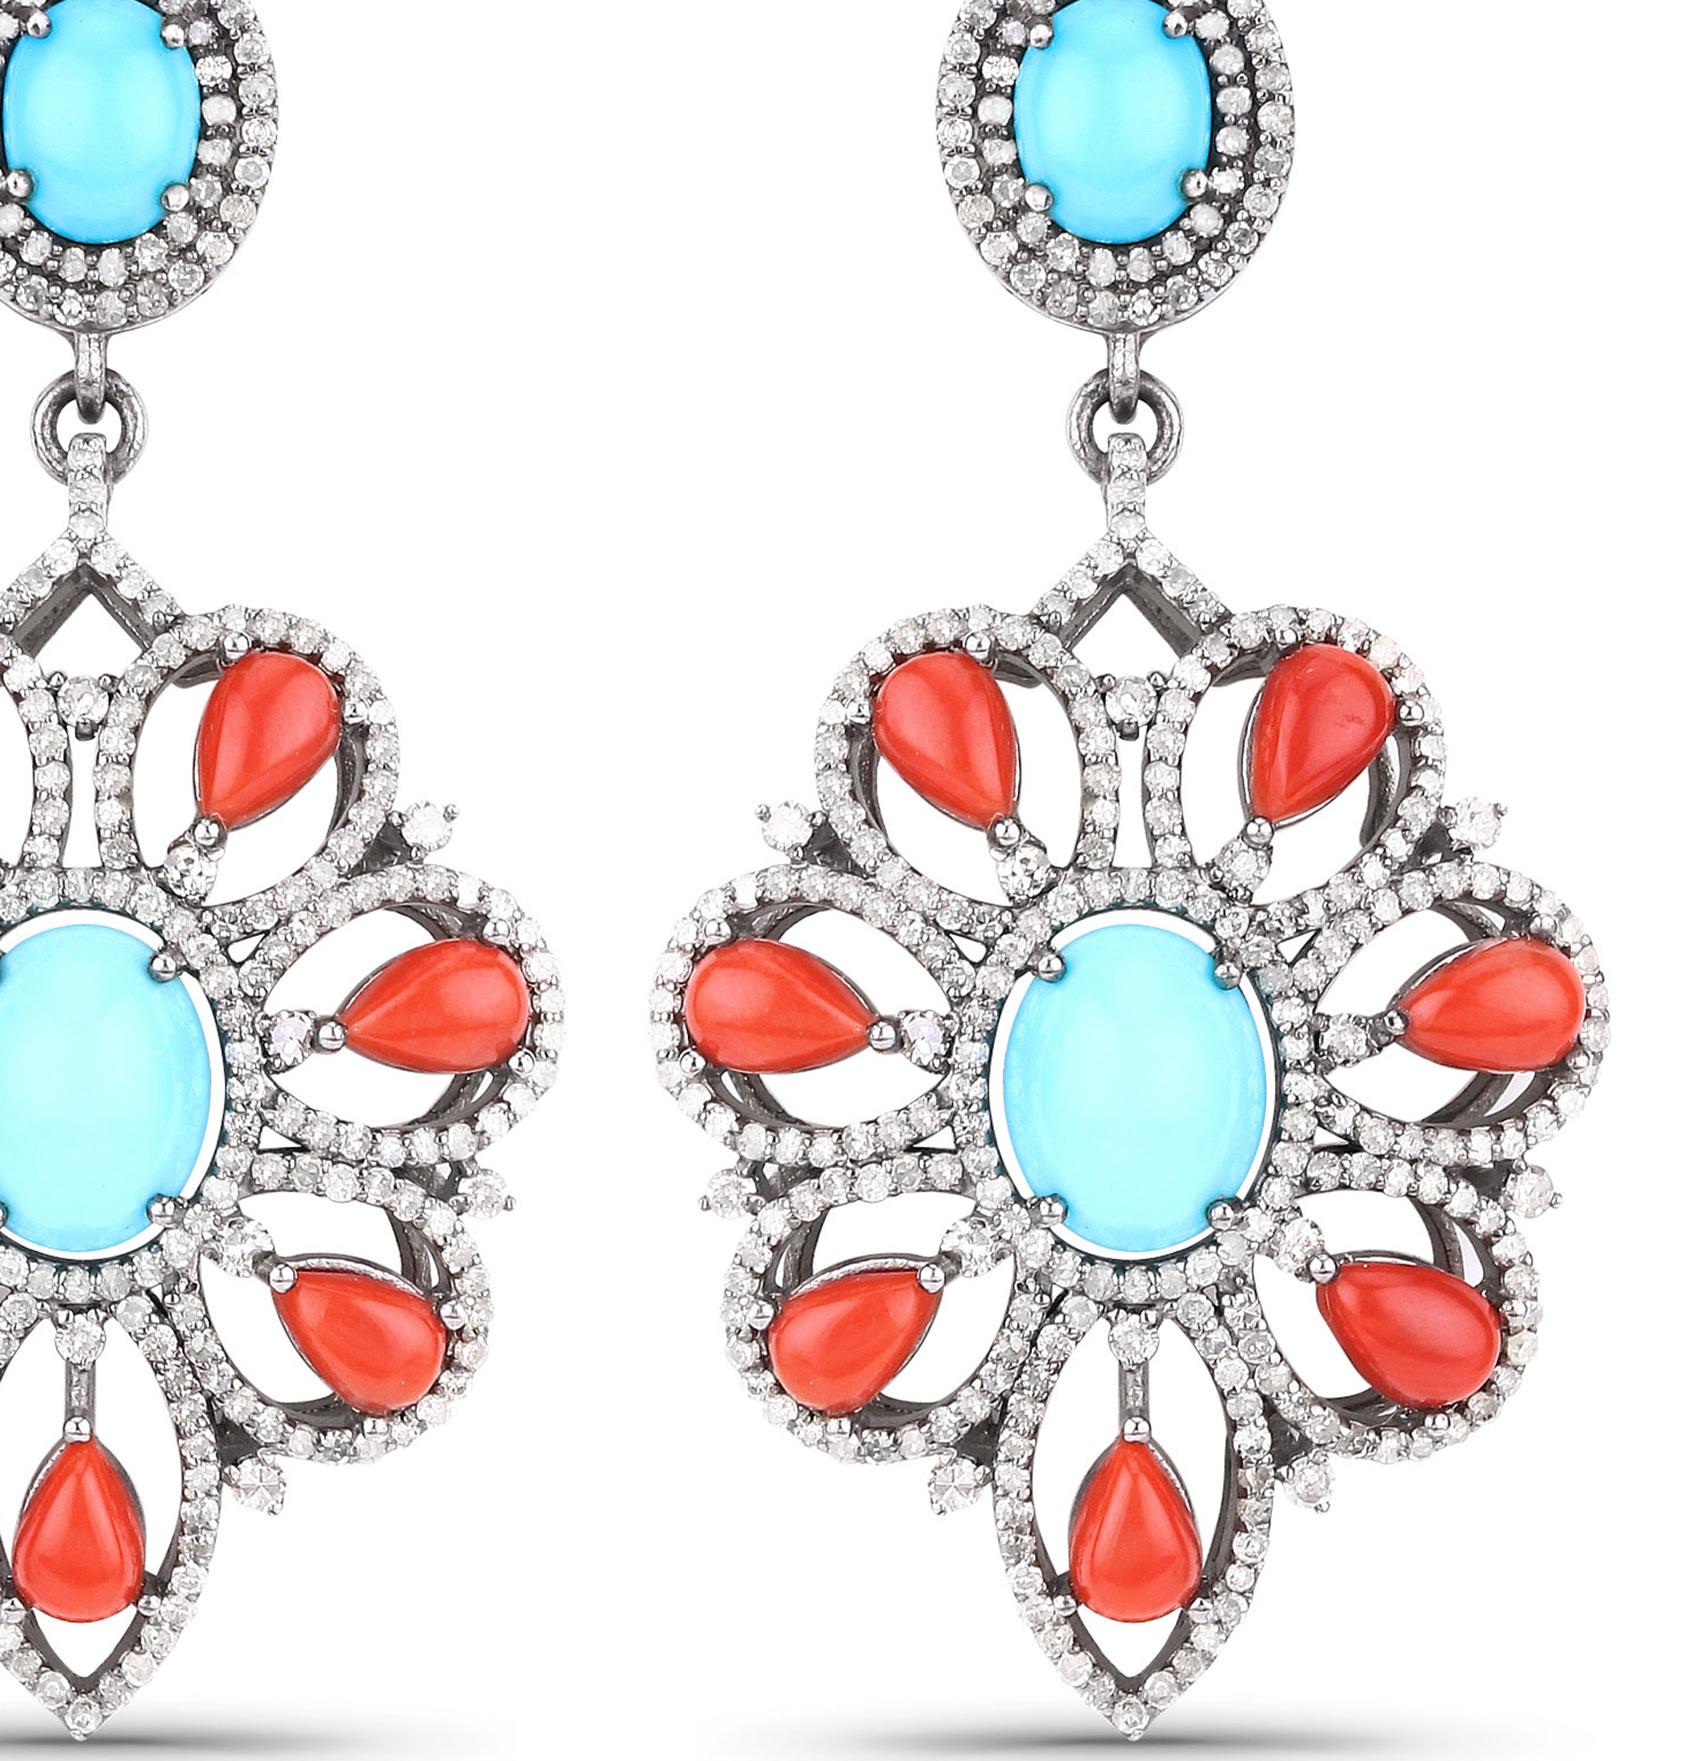 Mixed Cut Natural Coral Turquoise and Diamond Statement Earrings 16.75 Carats Total For Sale